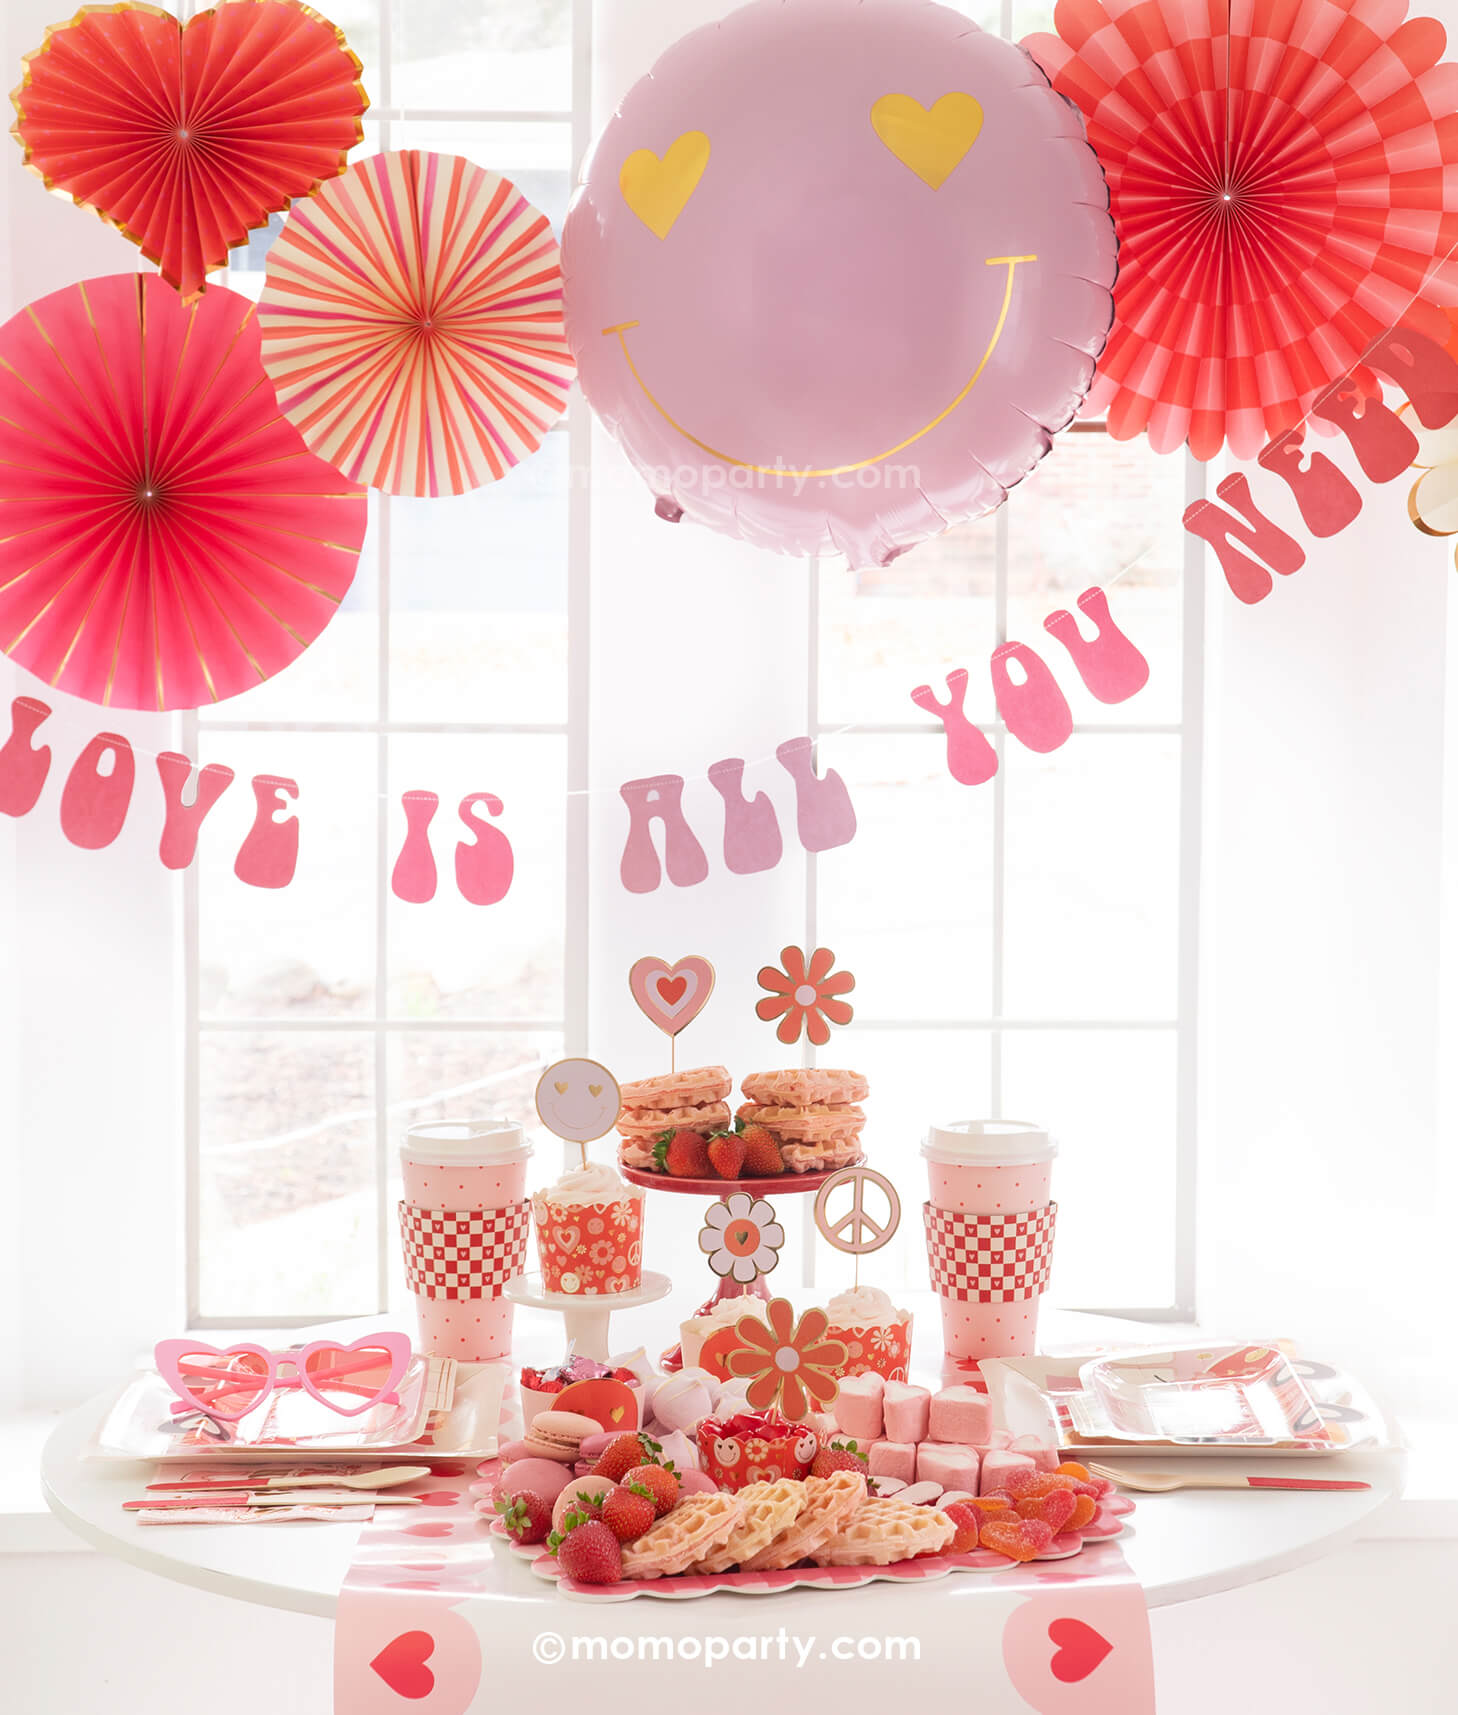 A Valentine's Day celebration featuring Momo Party's Groovy Valentine's Day Party box set up with pink and red paper fans in heart shape and a "love is all you need" banner in retro type hung below the paper fans. On the table you can see a sweet board featuring treats and snacks in red and pink colors including heart shaped waffles, strawberries, macarons, marshmallows etc. Next to the desert board featured retro inspired Valentine's plates, party cups and napkins,  a perfect inspo for Vday celebration!